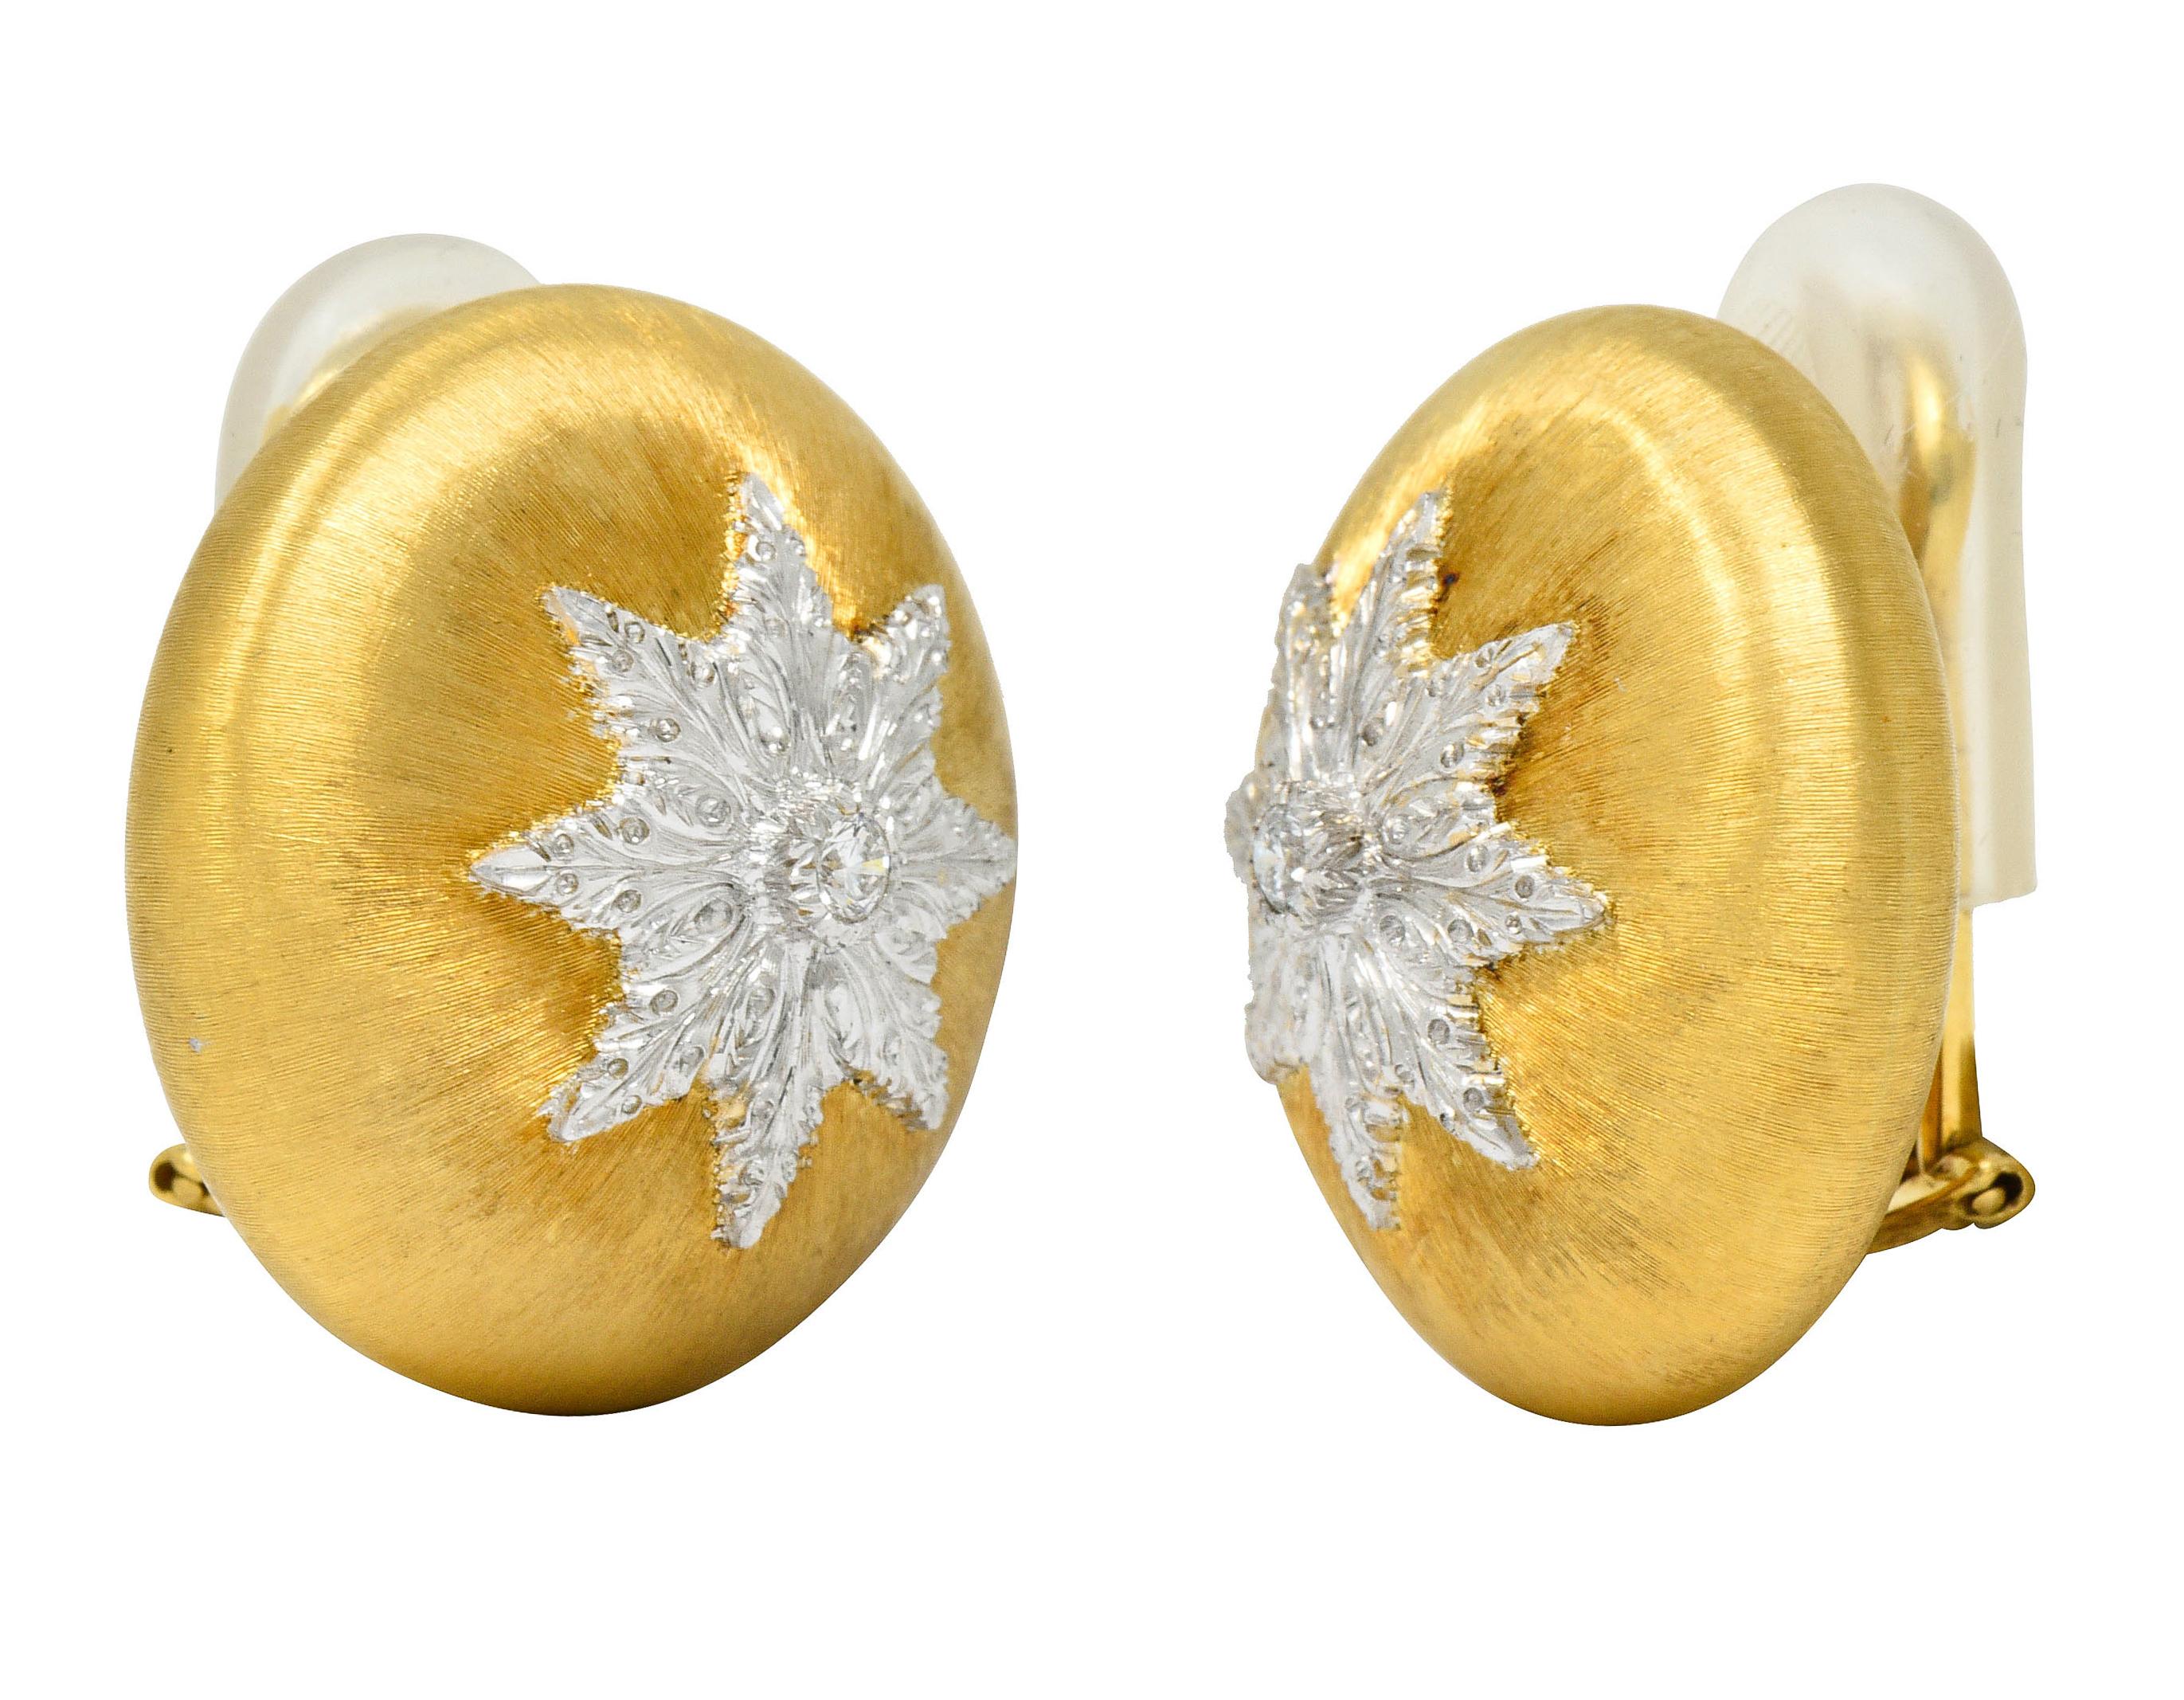 Ear-clip earrings are designed as planished gold domes with a strongly brushed finish

Featuring a white gold snowflake motif with deeply engraved details

Centering round brilliant cut diamonds weighing in total approximately 0.16 carat; eye-clean